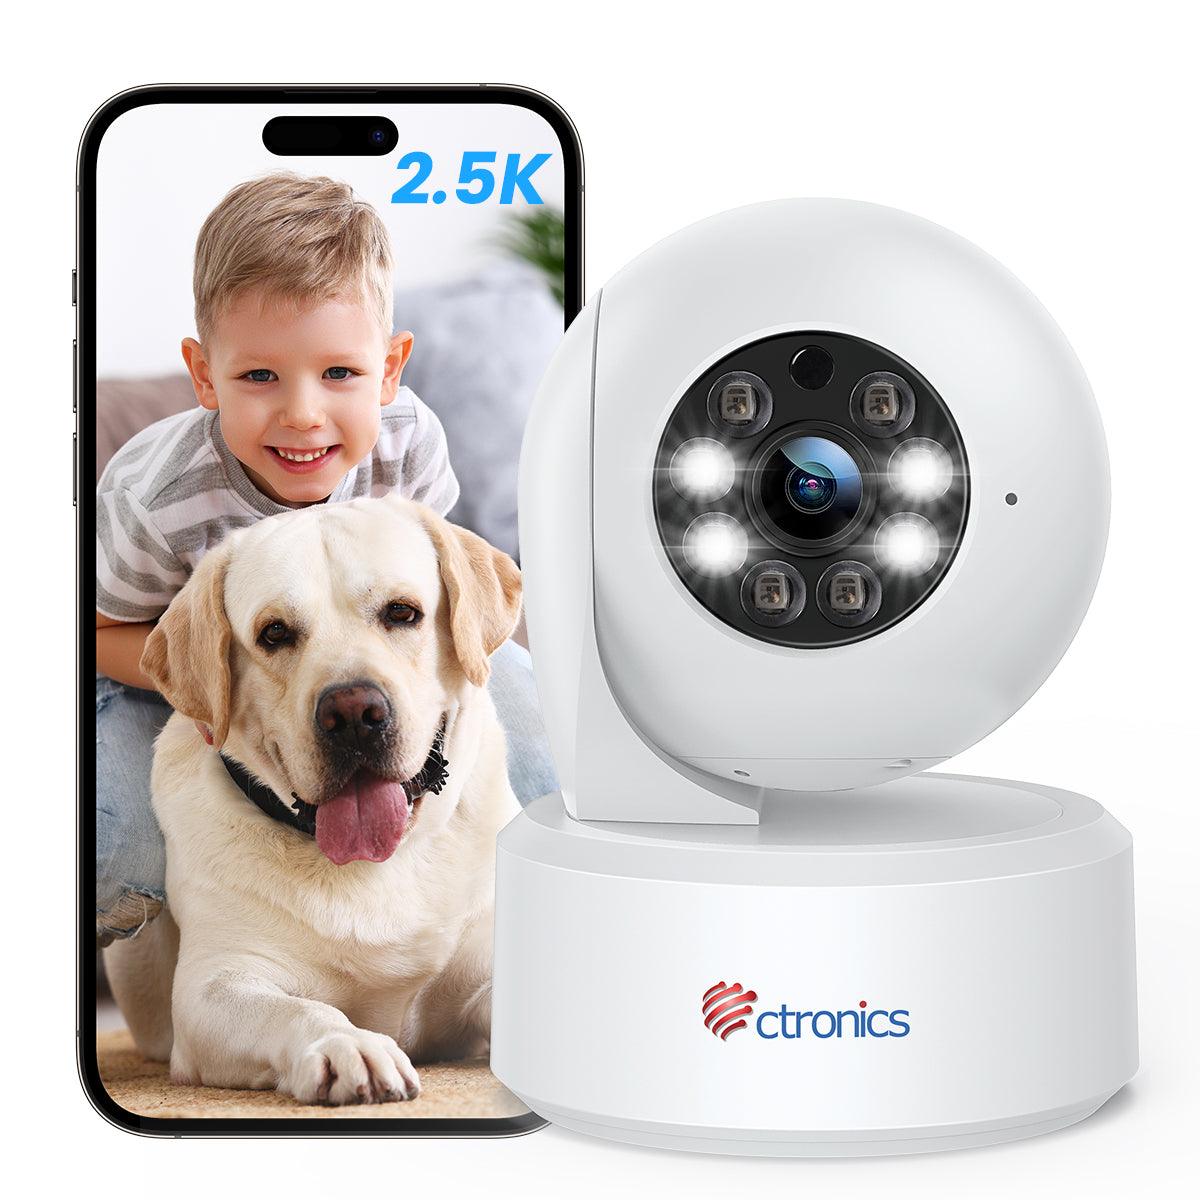 2.4/5Ghz 2.5K 4MP Indoor WiFi Surveillance Camera Human Motion Detection Auto Tracking for Baby Pets - uk.ctronics